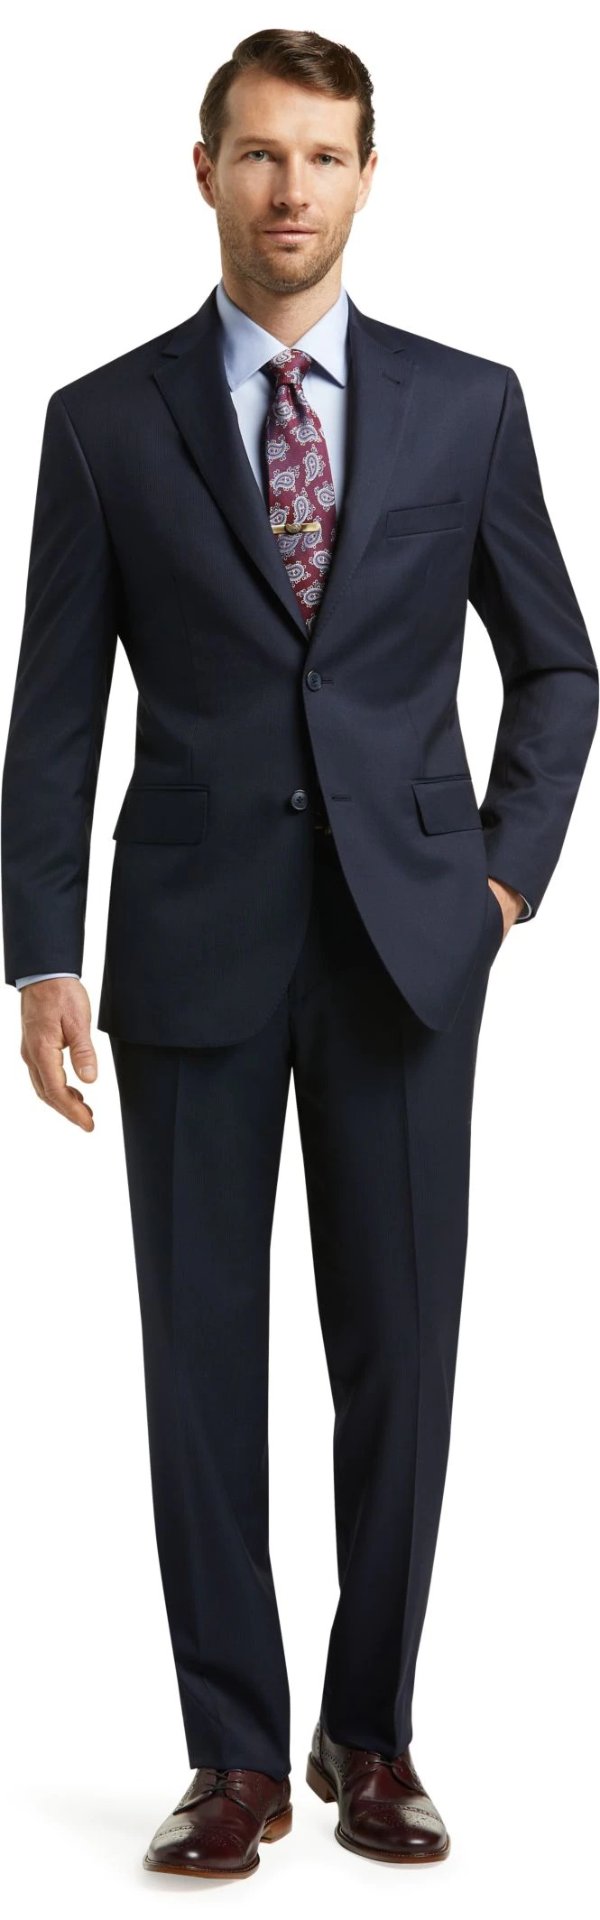 Reserve Collection Tailored Fit Woven Stripe Suit CLEARANCE - All Clearance | Jos A Bank